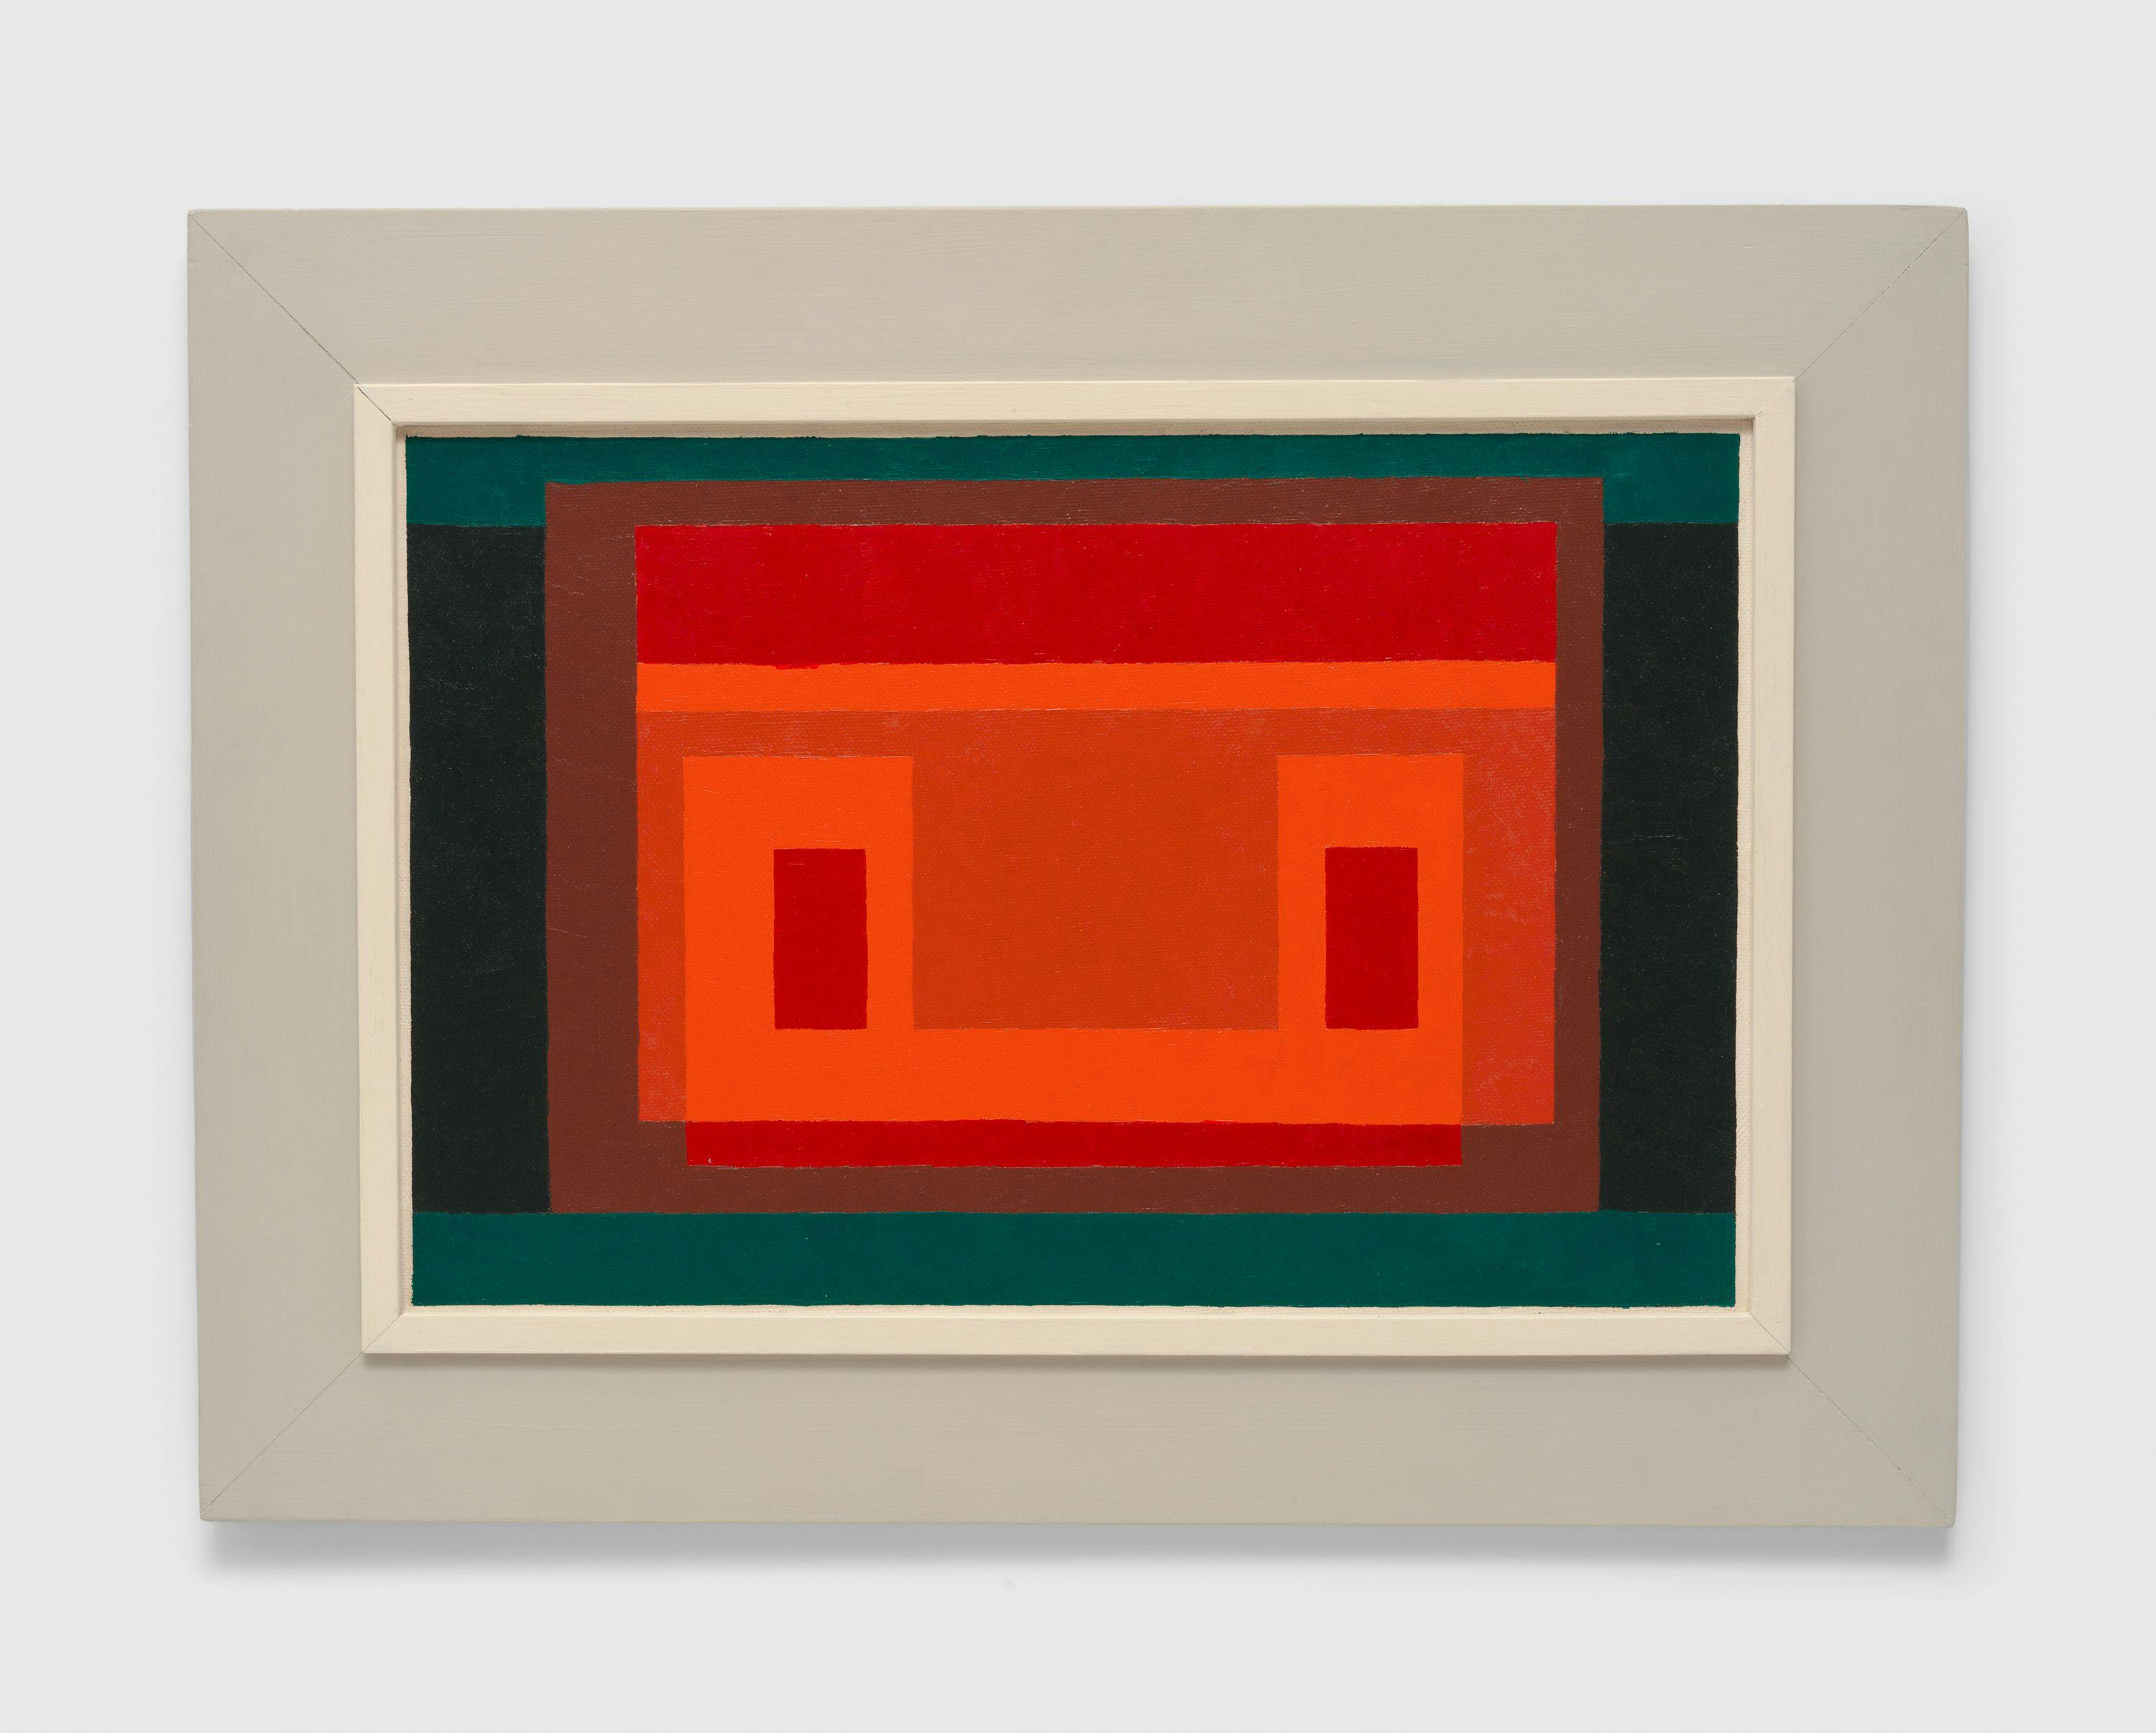 A painting by Josef Albers, titled On the Other Side, dated 1952.